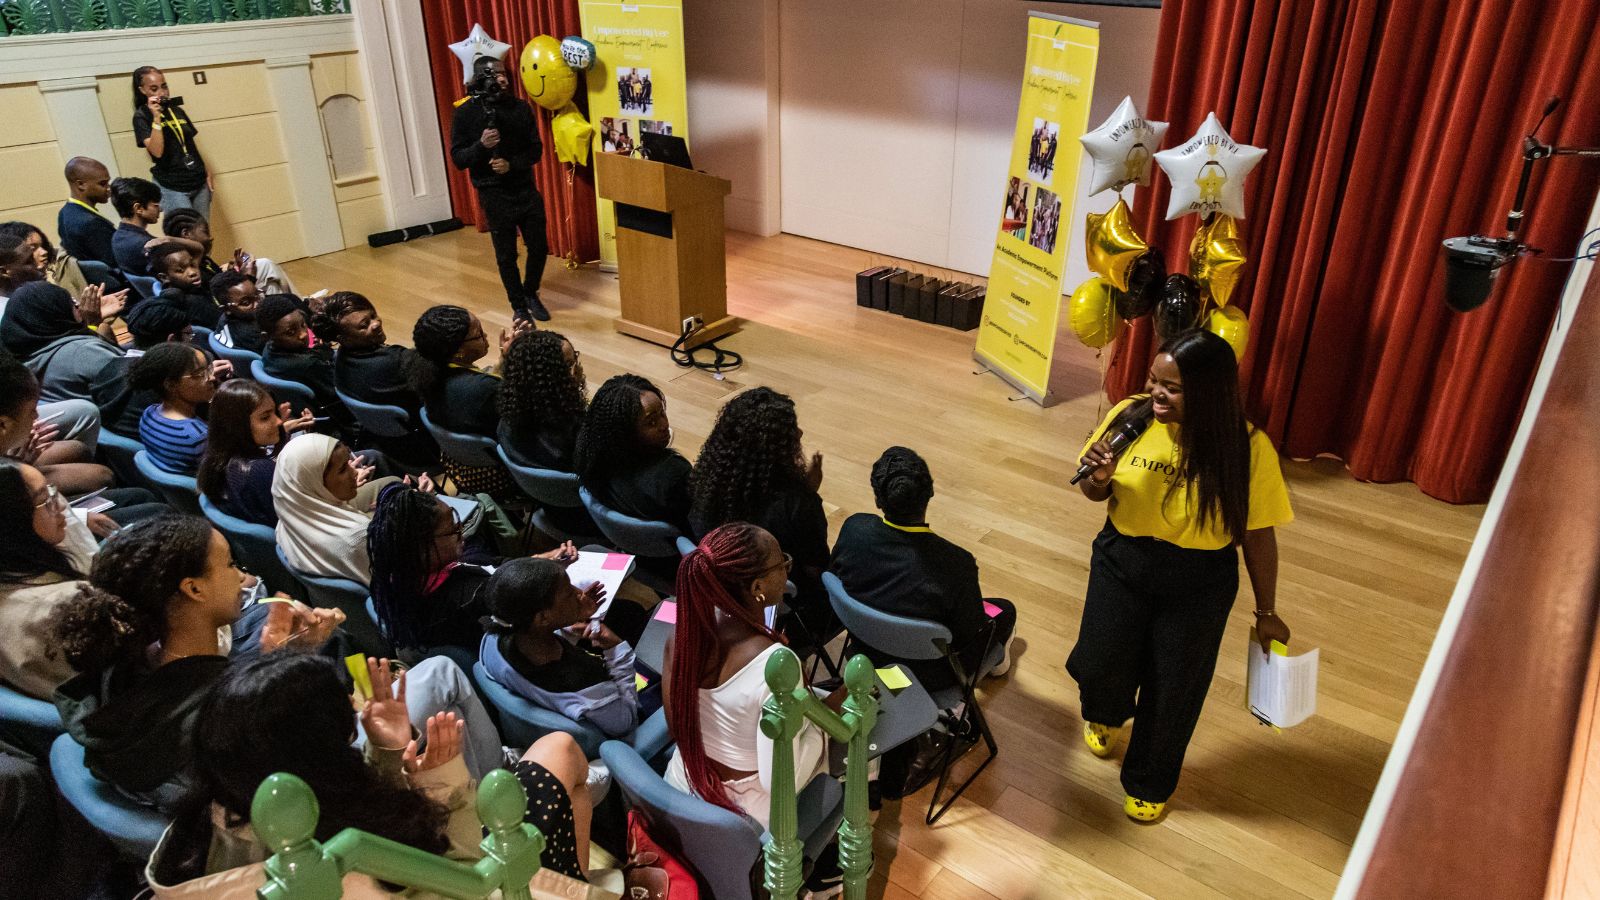 A group of young people in a lecture theatre, with Vee Kathivu wearing a yellow tshirt and holding a microphone